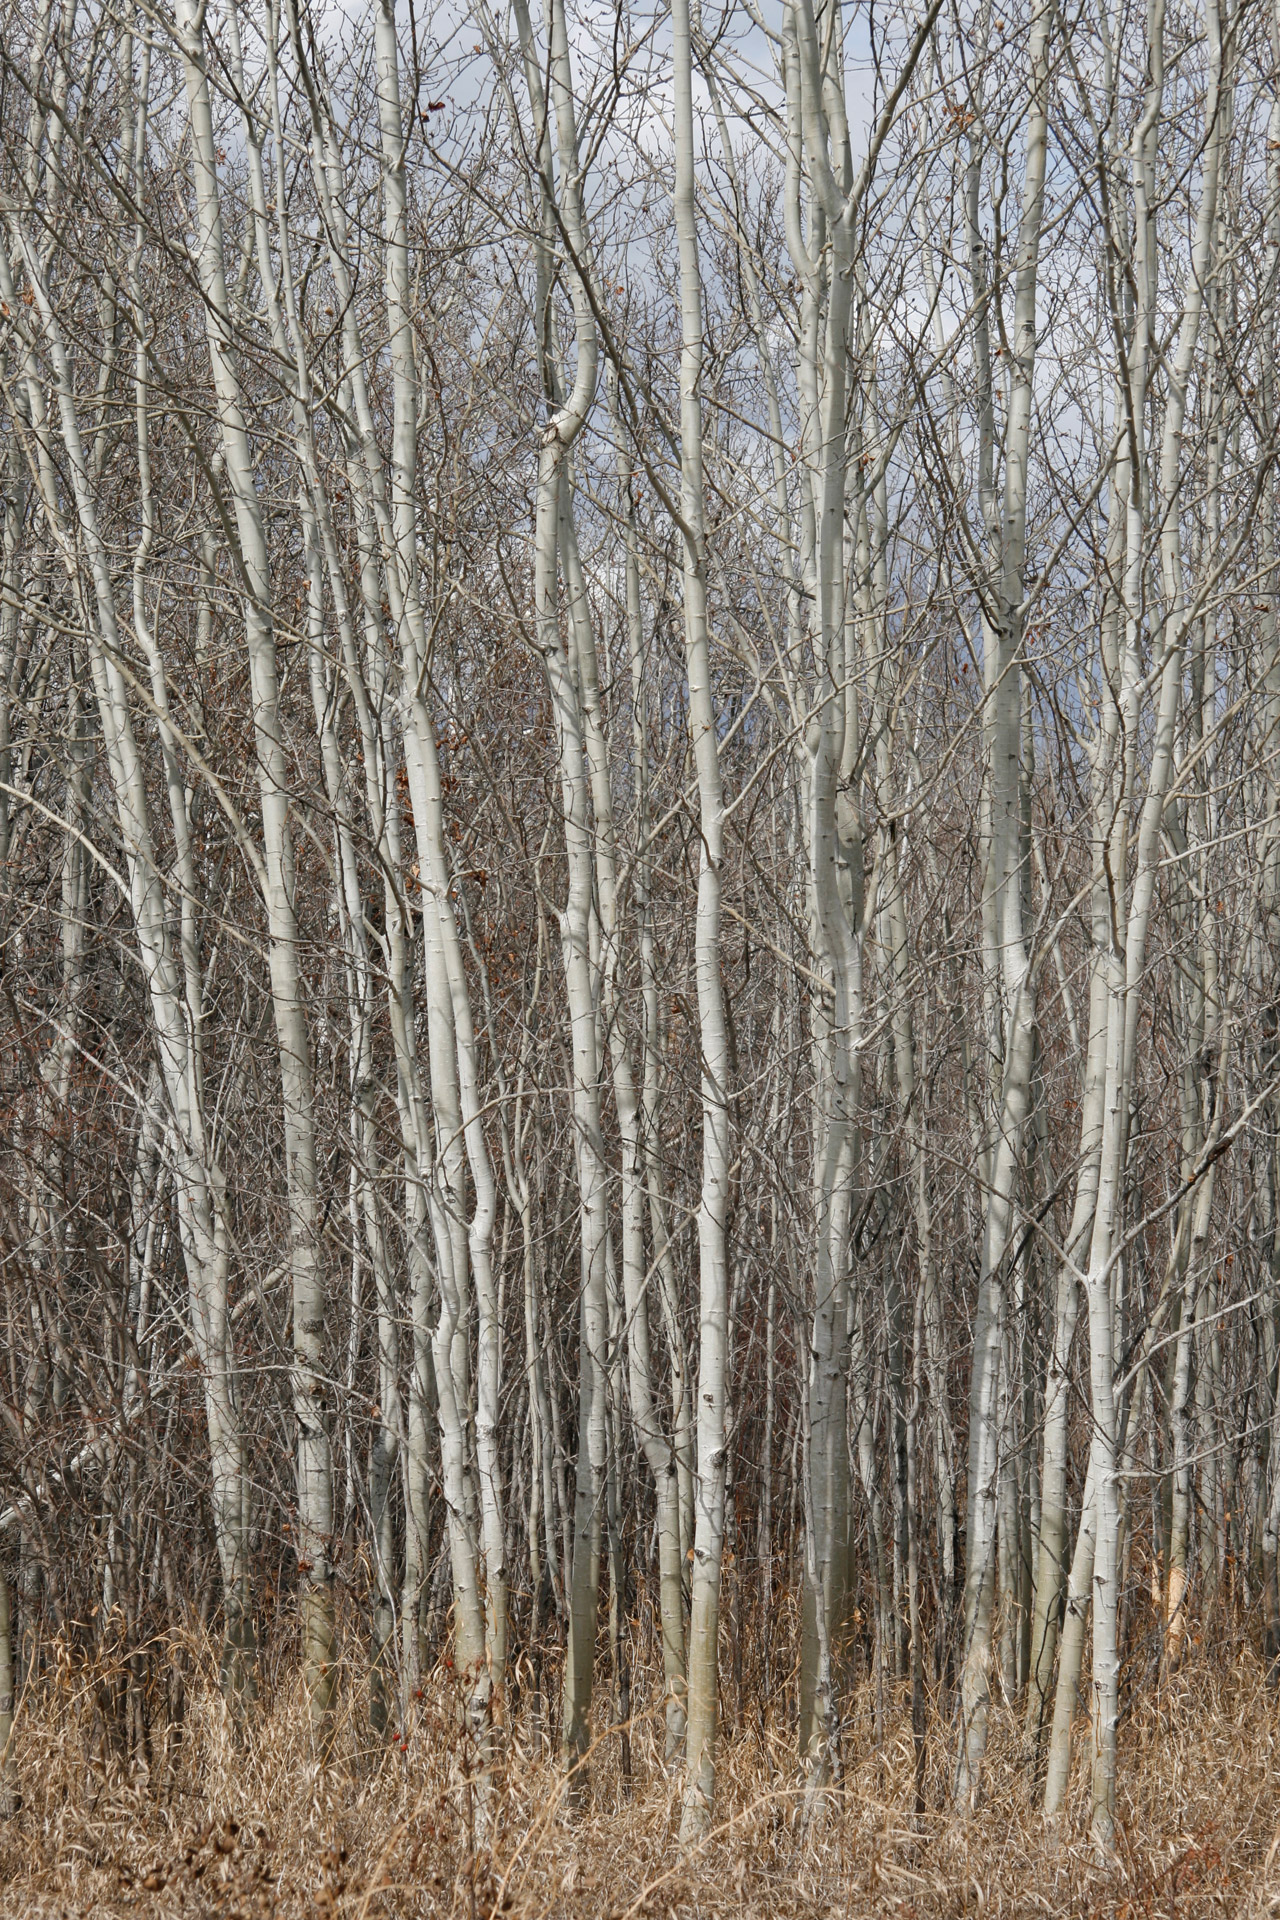 birch trees forest free photo